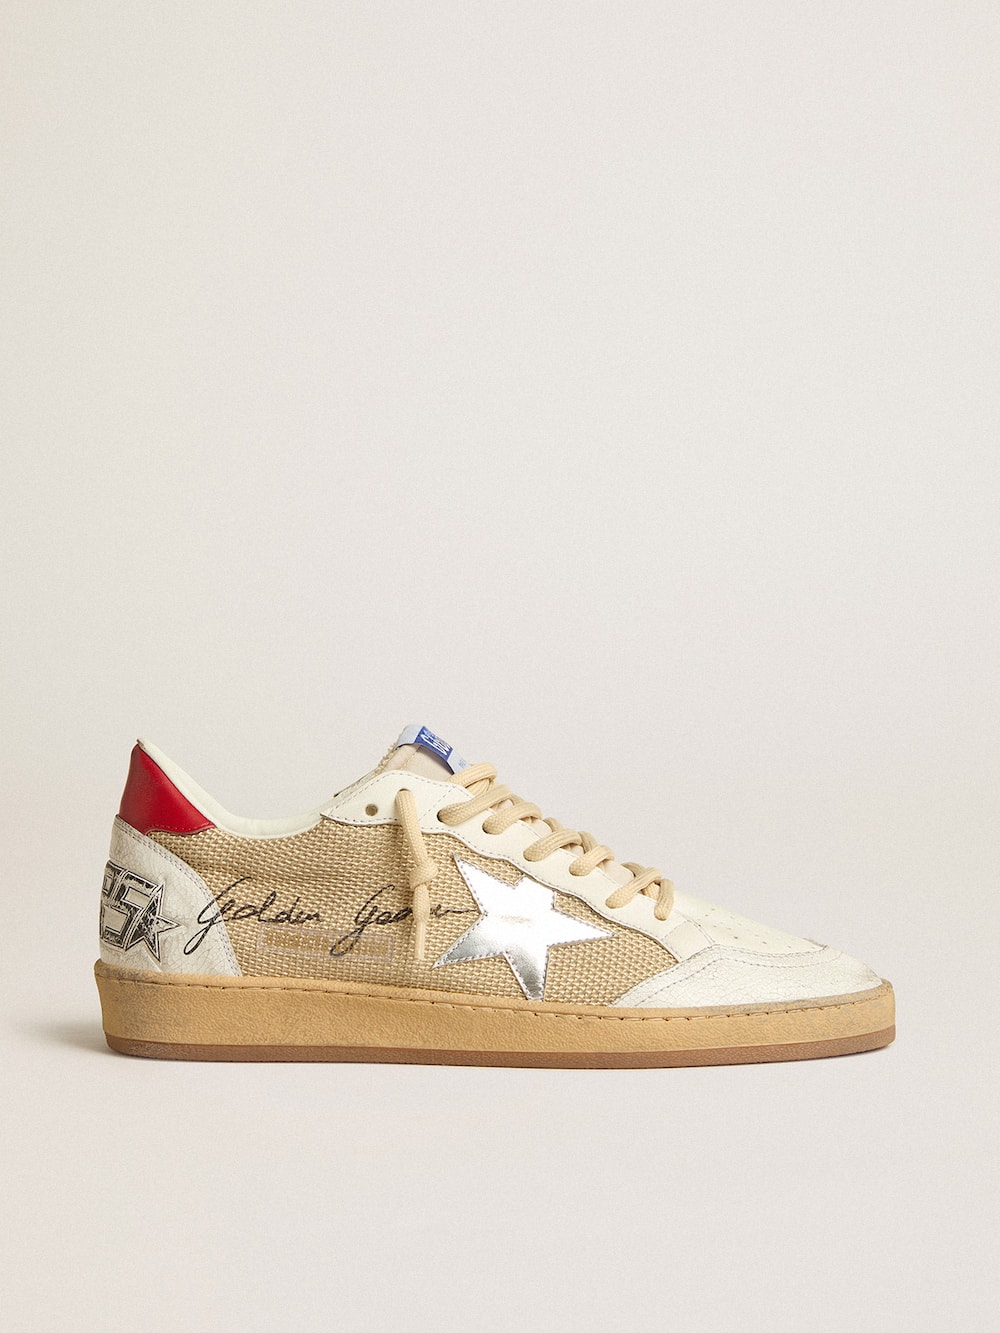 Golden Goose - Ball Star LTD in mesh with metallic leather star and red heel tab in 